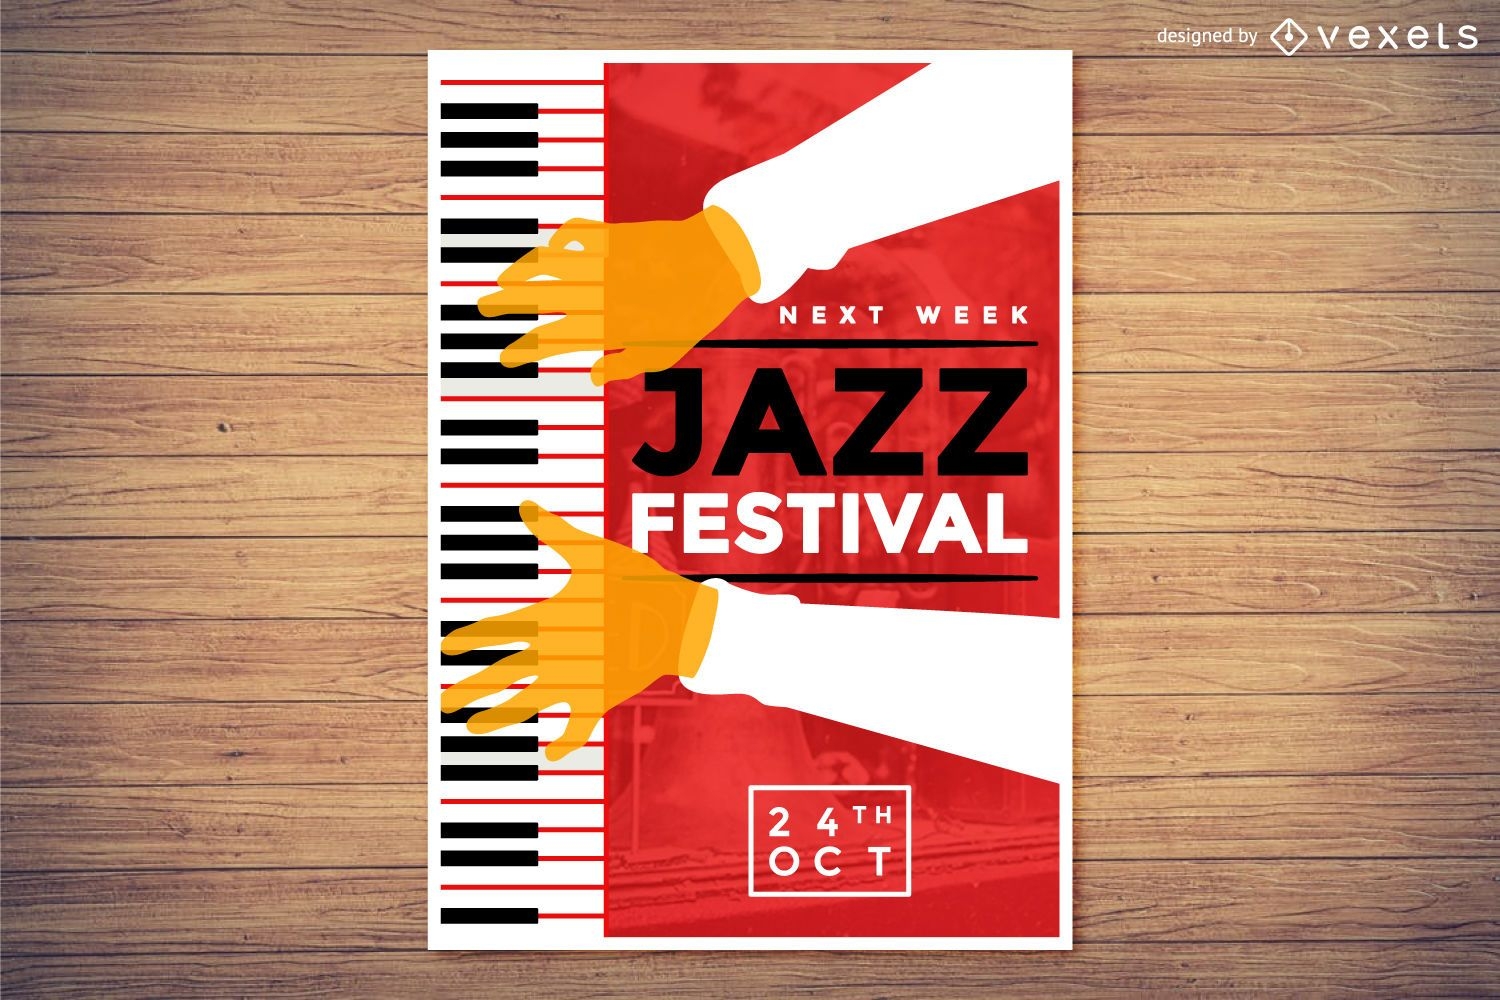 Piano and Jazz music festival poster